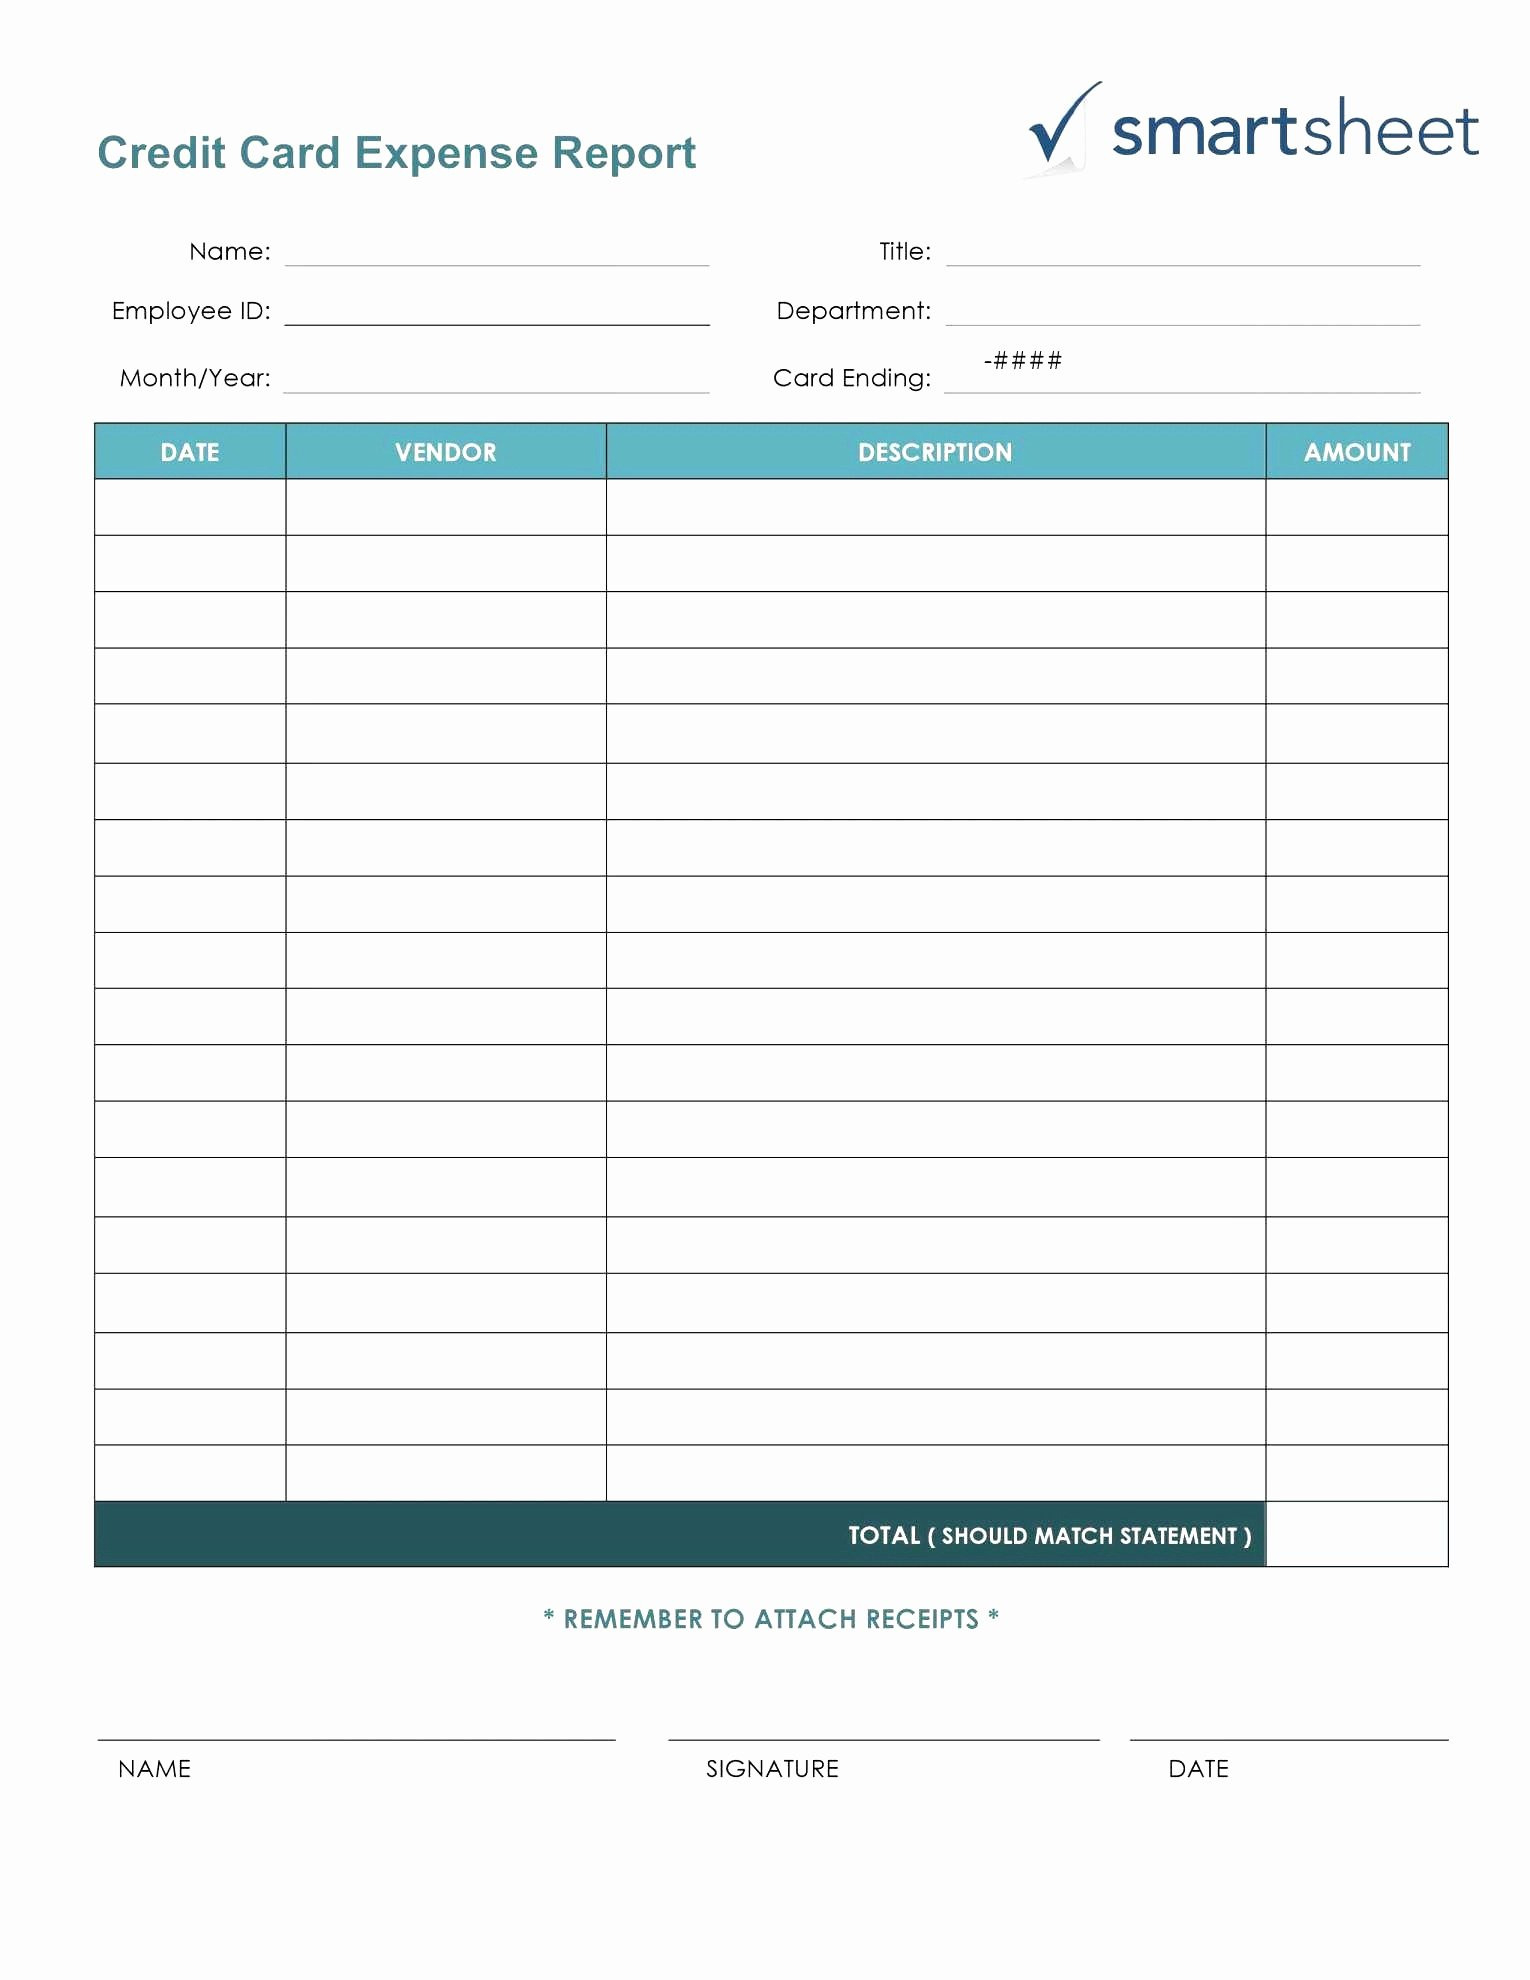 Credit Card Worksheet Answers